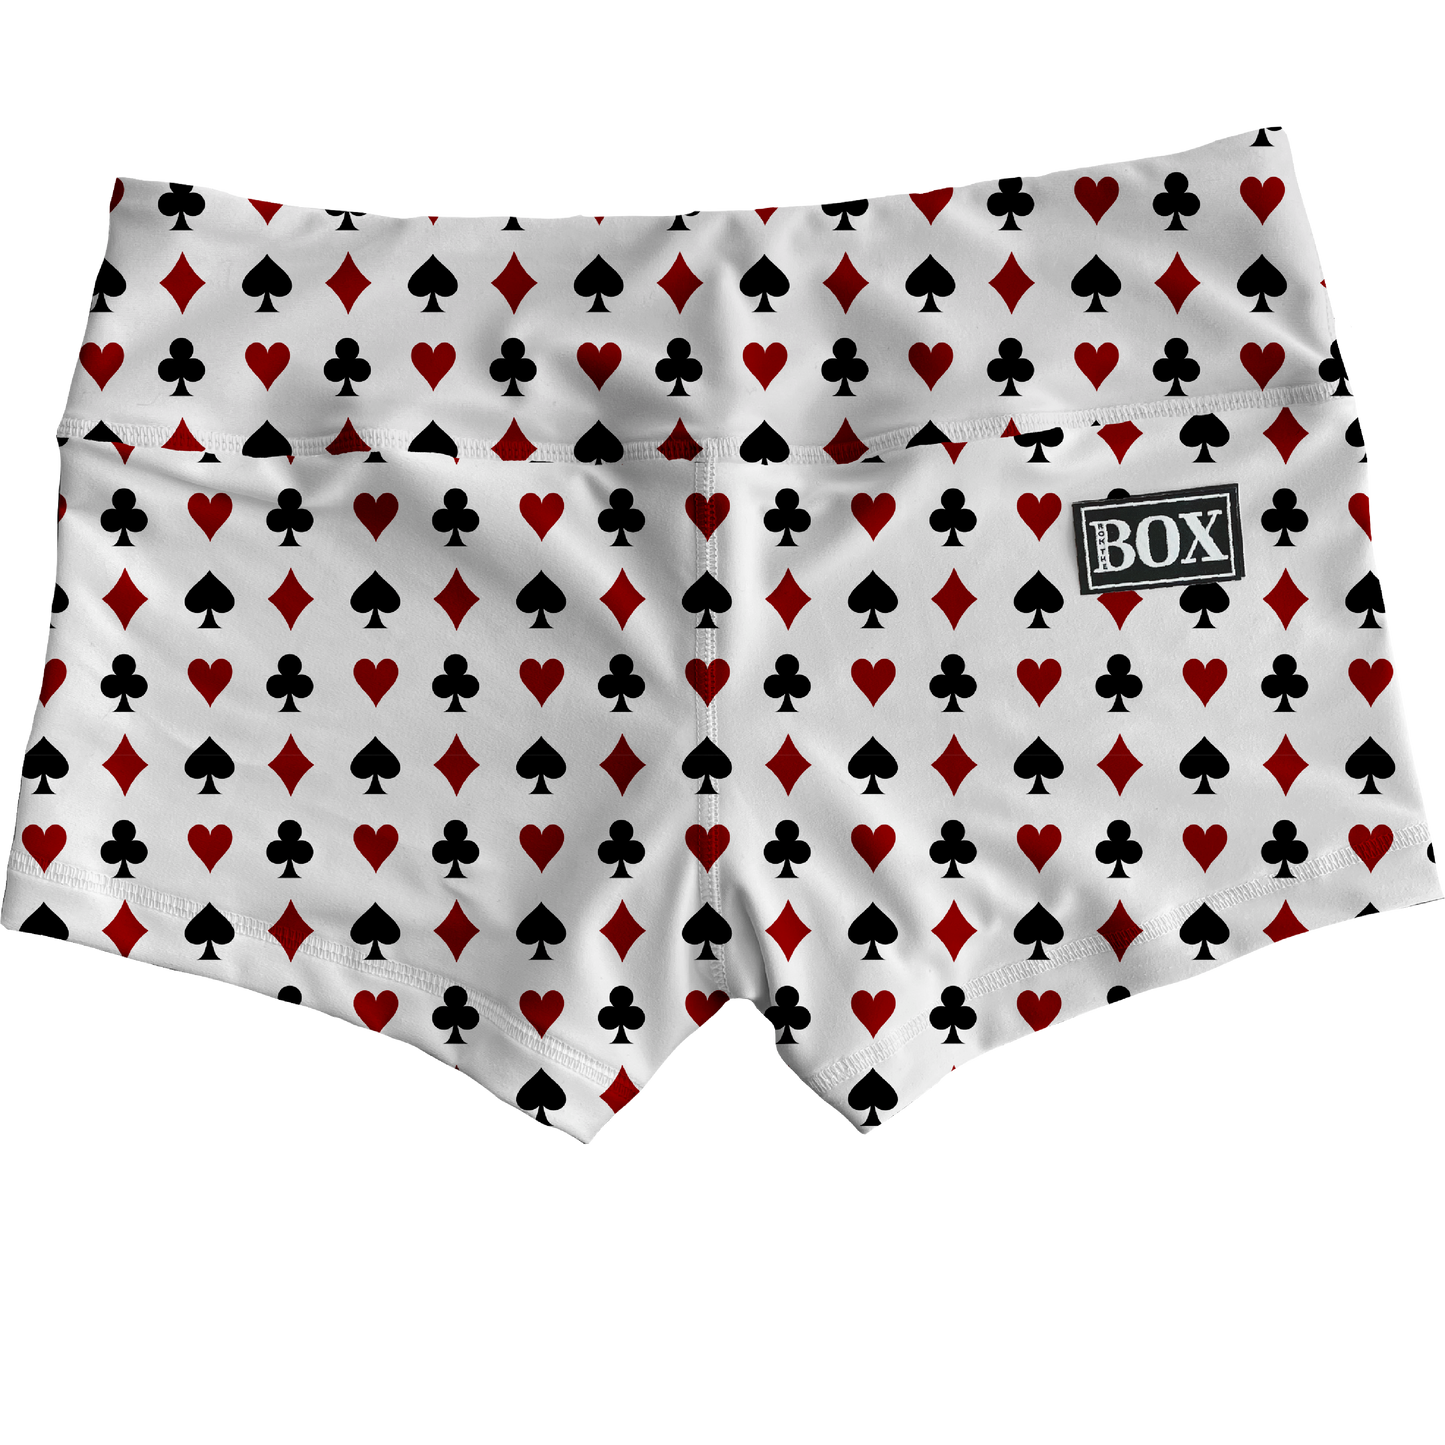 Queen of Cards Shorts  (add lining for extra coverage)